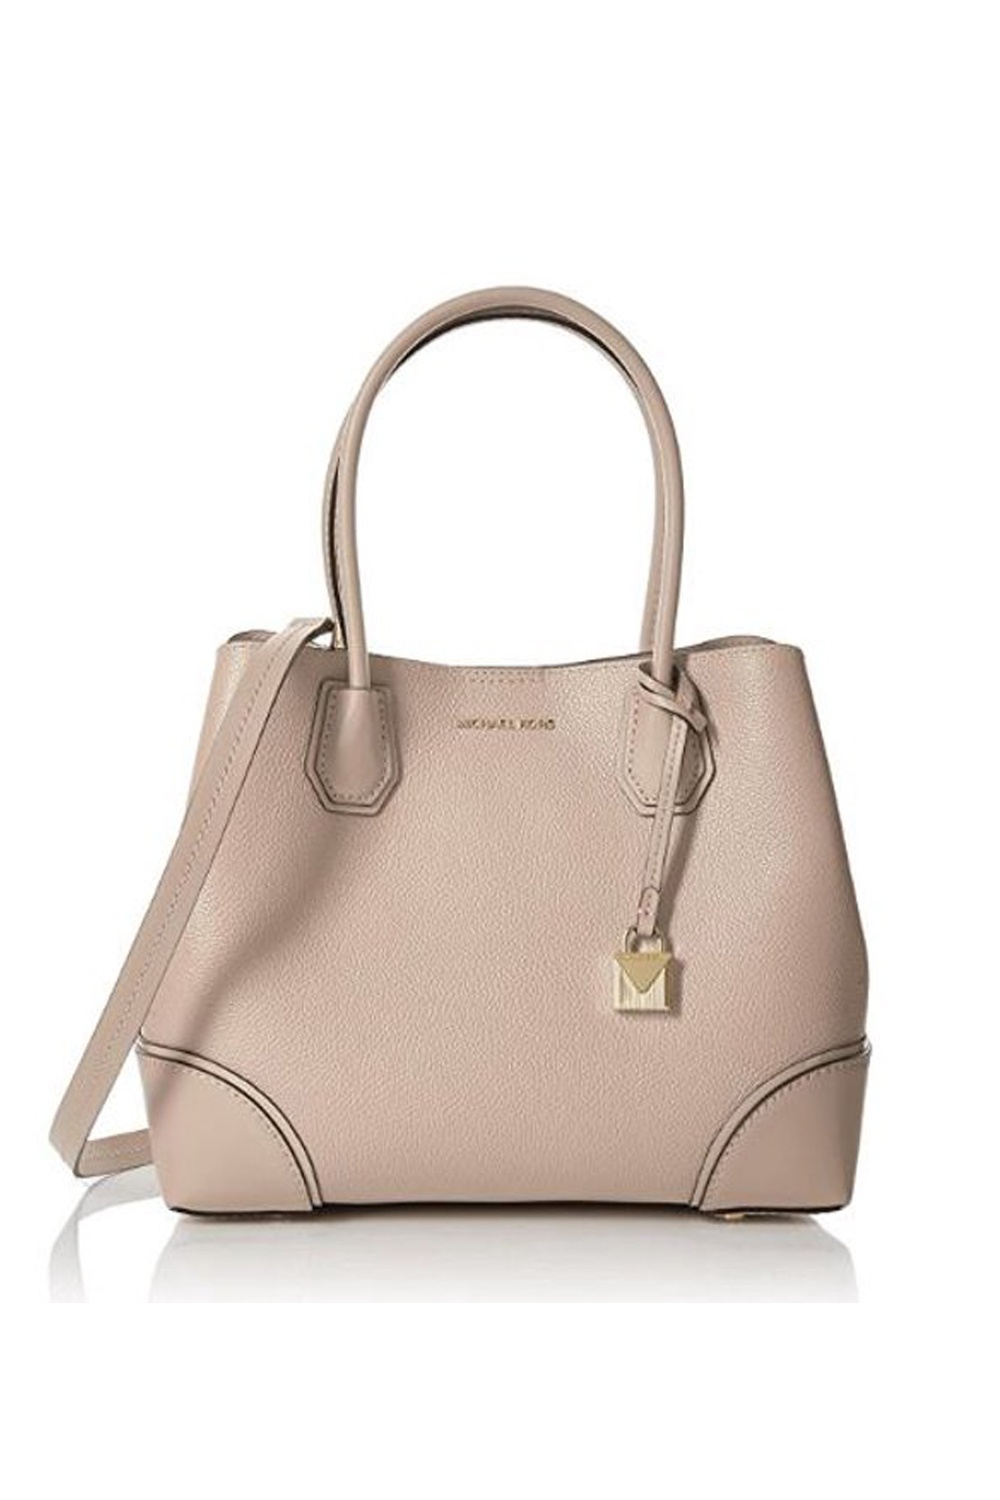 Mercer leather tote Michael Kors Beige in Leather  34267103